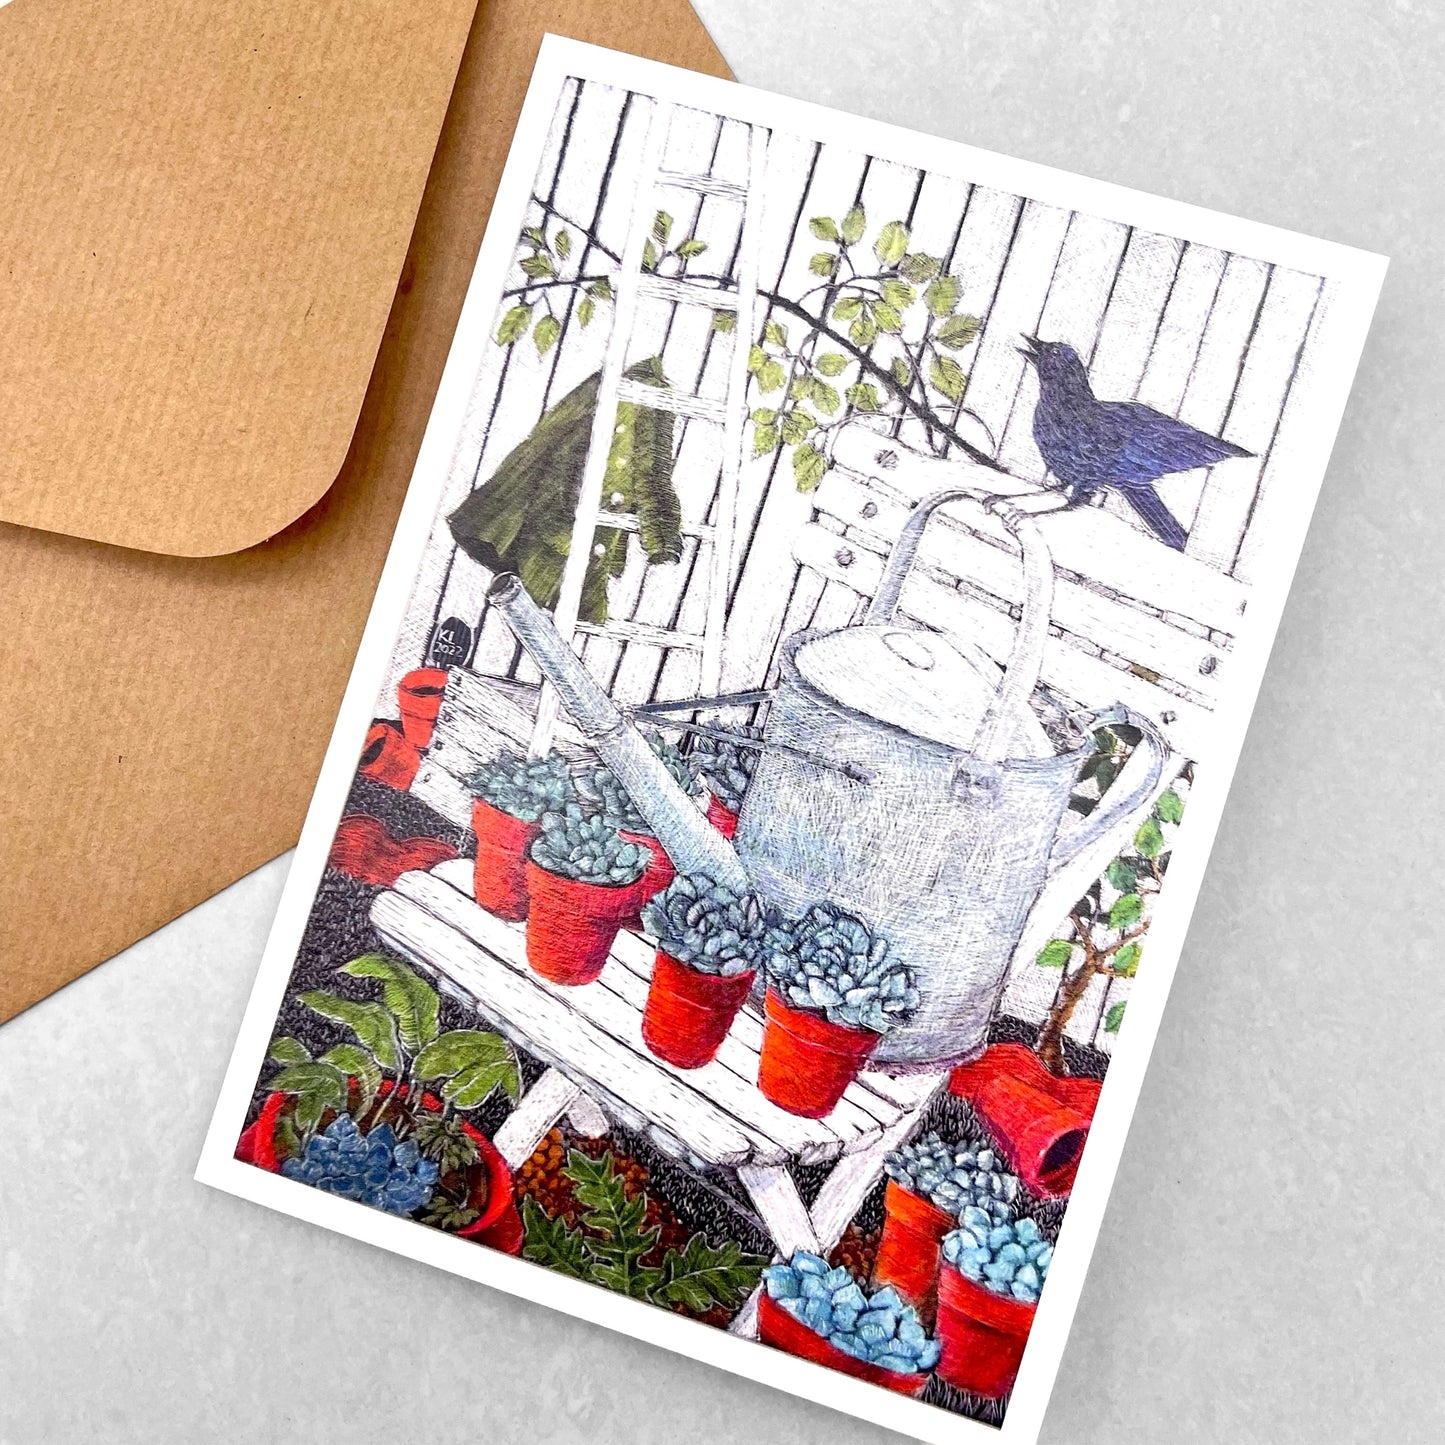 greetings card showing a drawing of a garden chair with a watering can, plants and a bird by John Austin Publishing